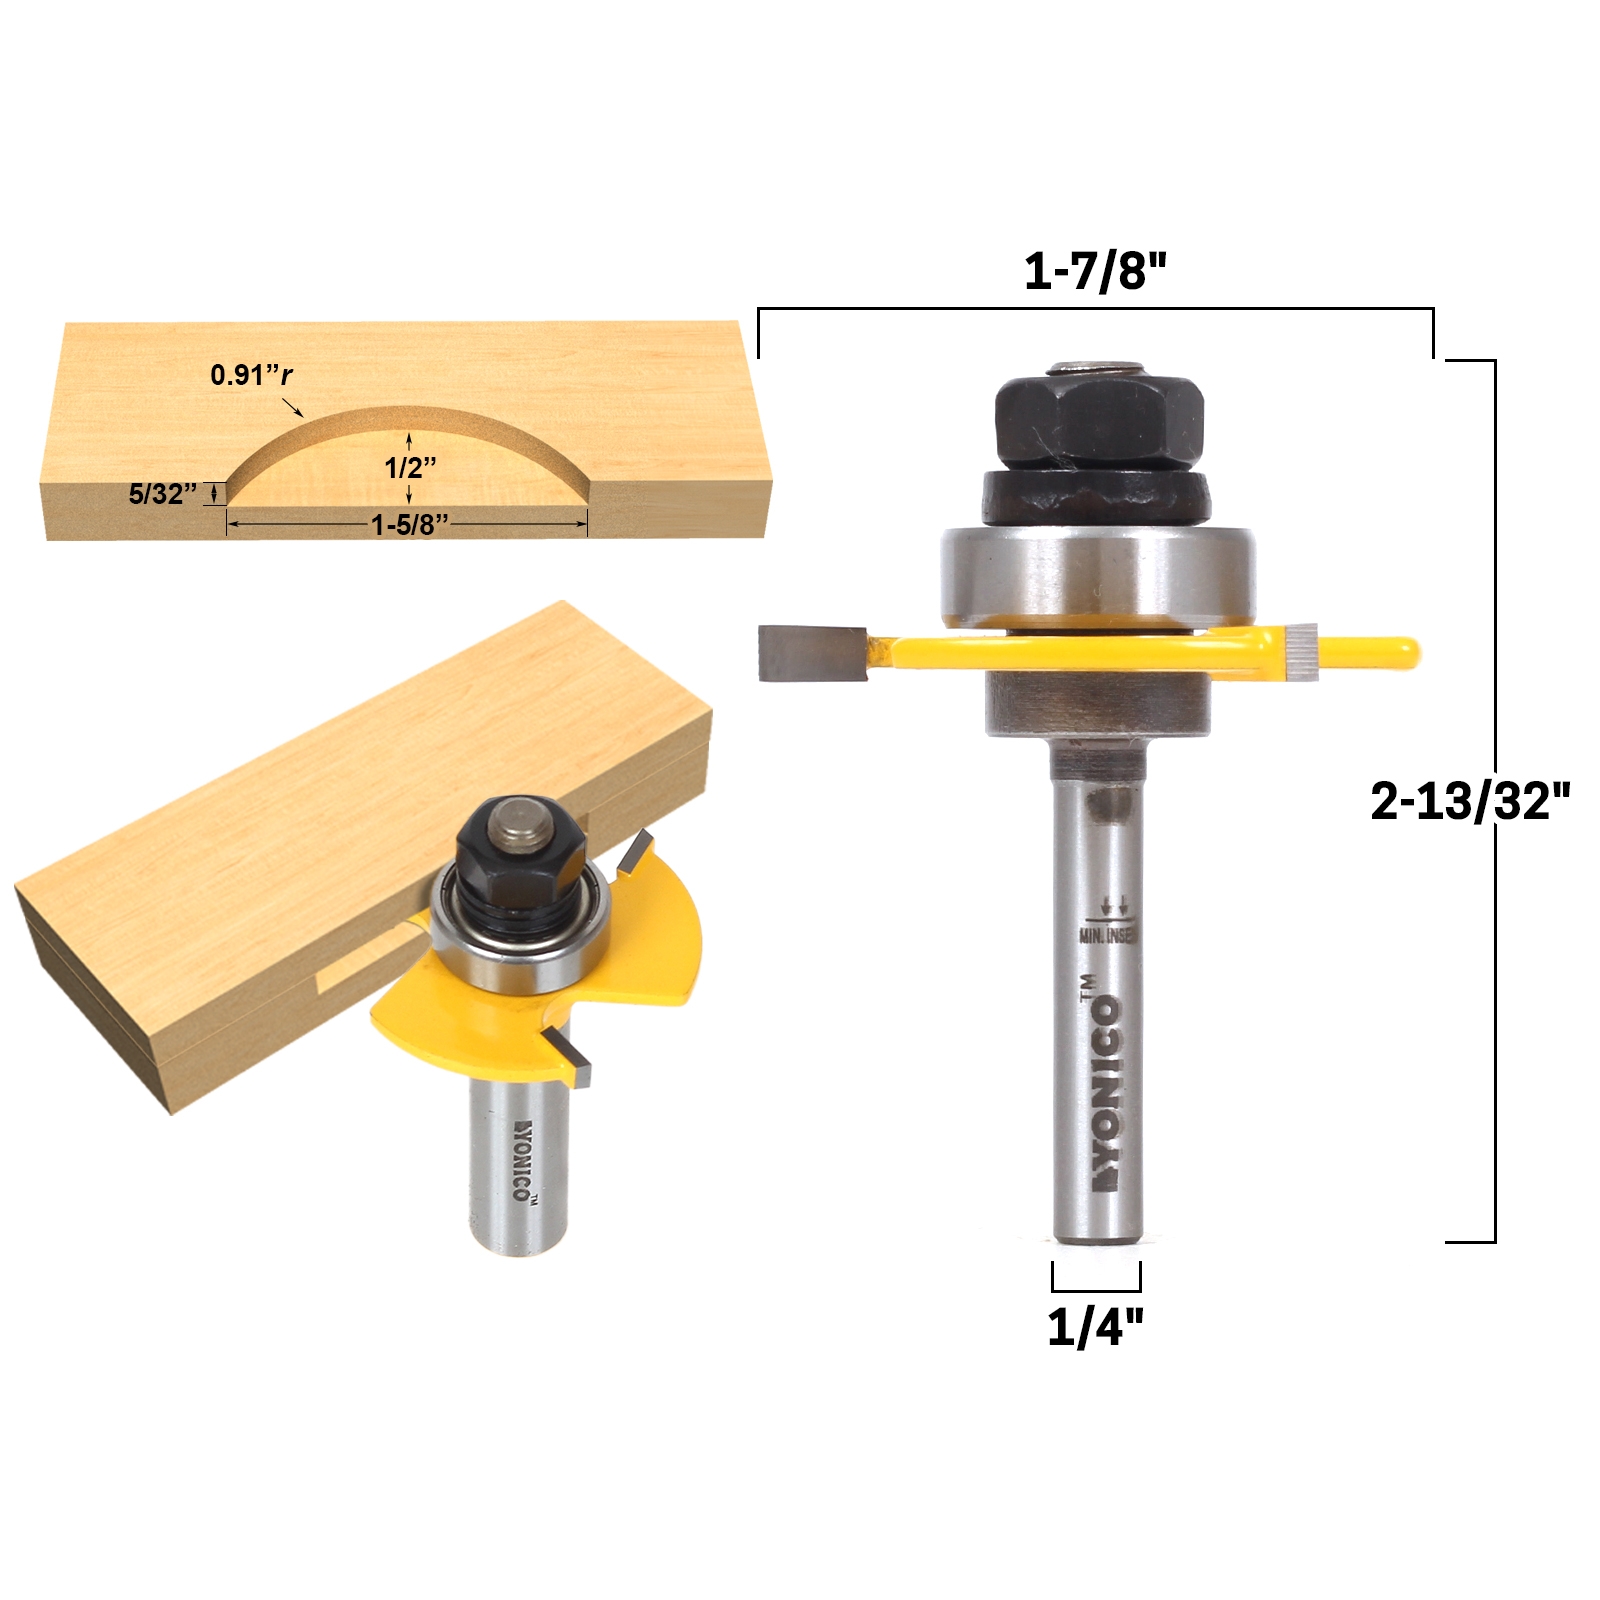 1 pc 1/4" SH Biscuit #0 Slotting 5/32"x5/16" Joint Assembly Router Bit S